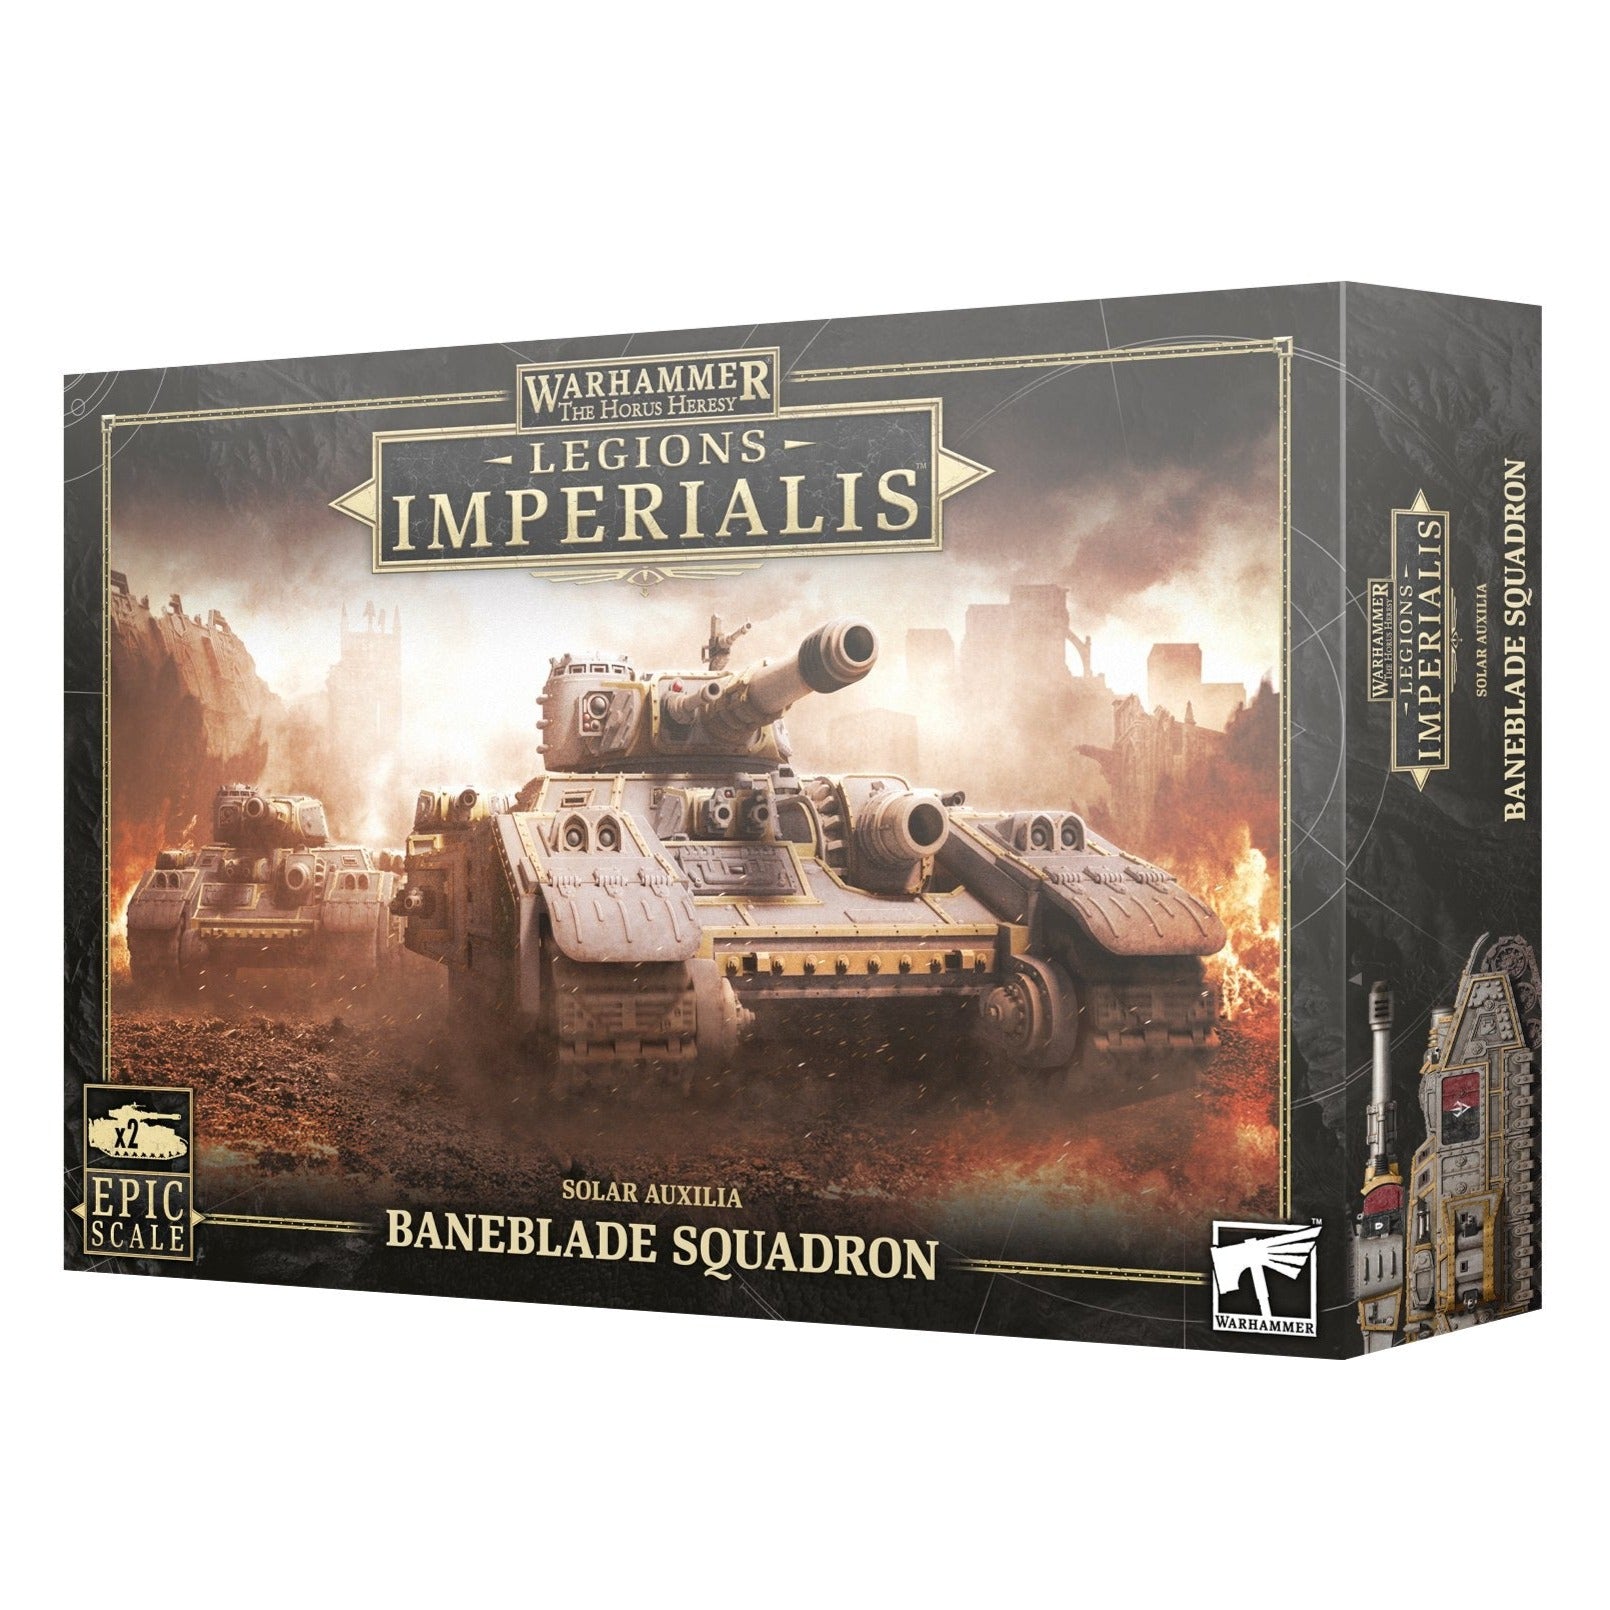 Legions Imperialis: Baneblade Squadron - Release Date 2/12/23 - Loaded Dice Barry Vale of Glamorgan CF64 3HD